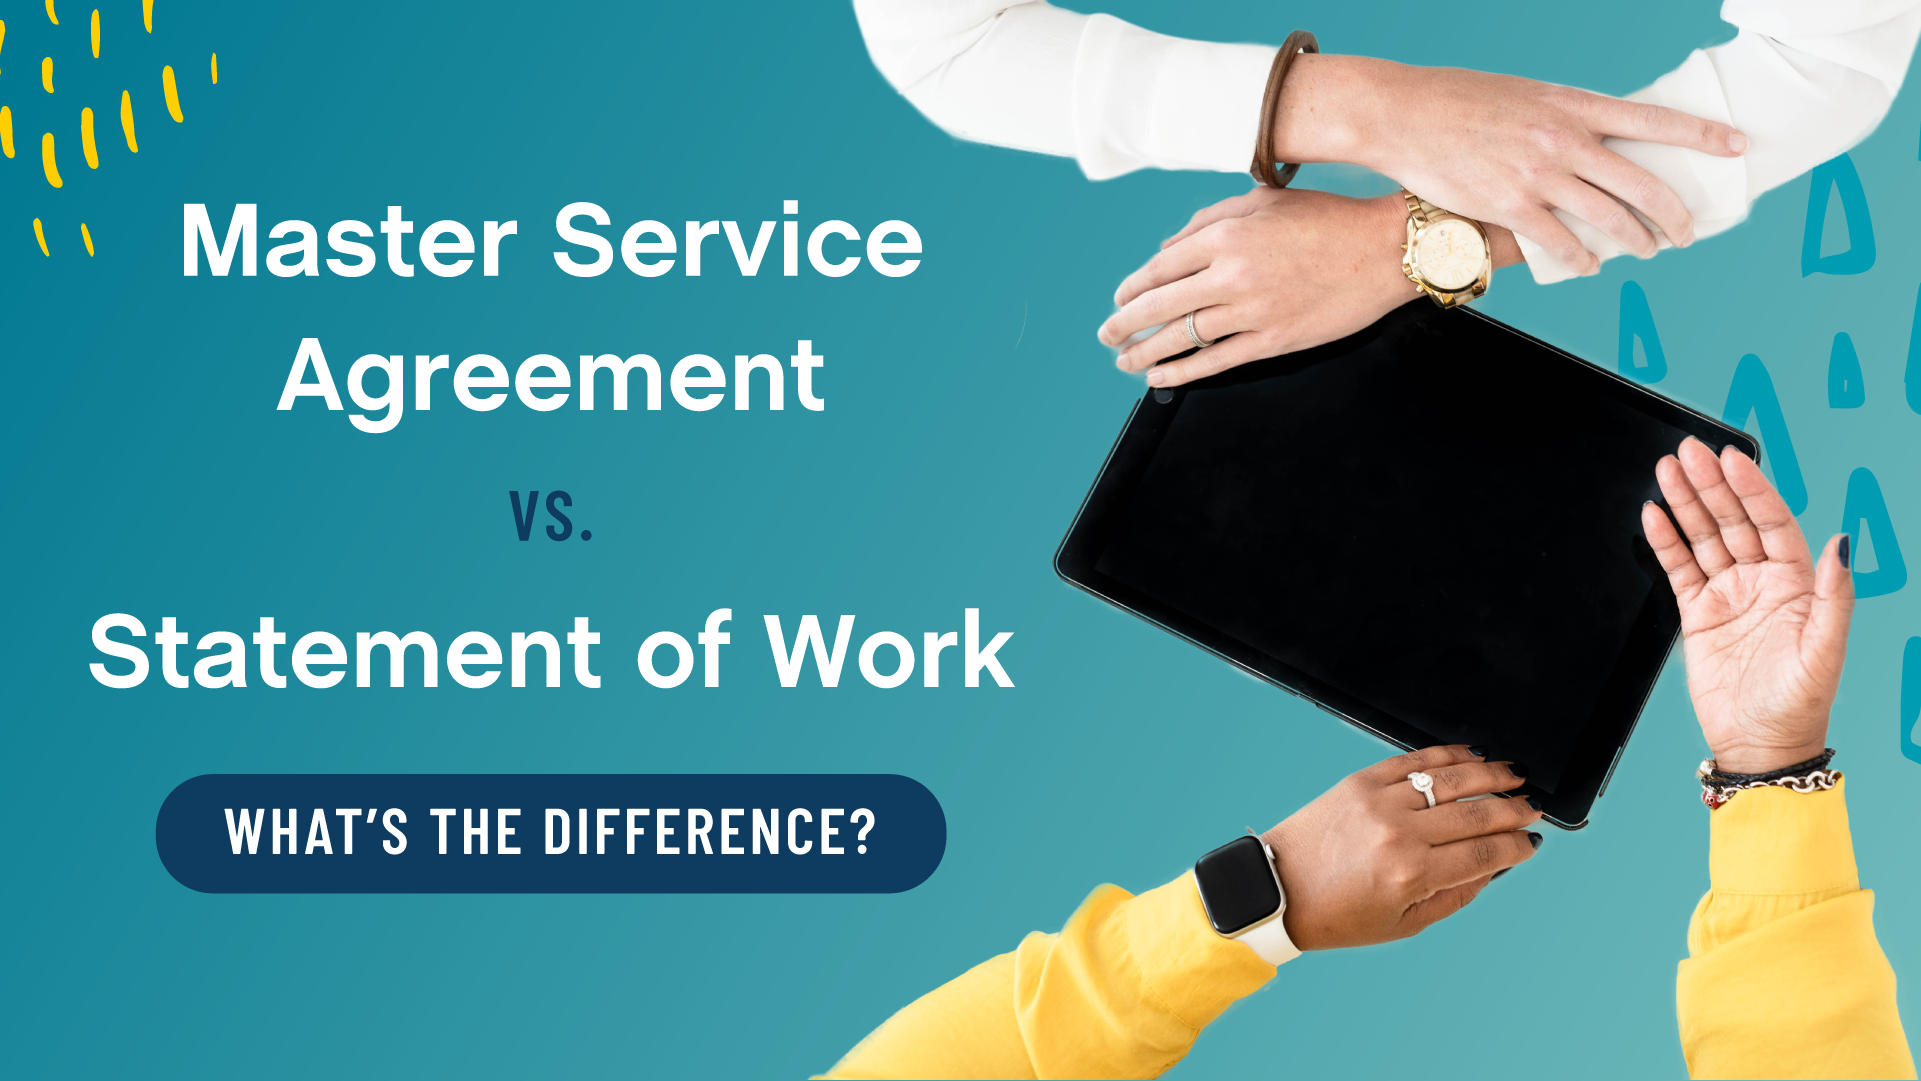 Master Service Agreement vs. Statement of Work: What’s the Difference?